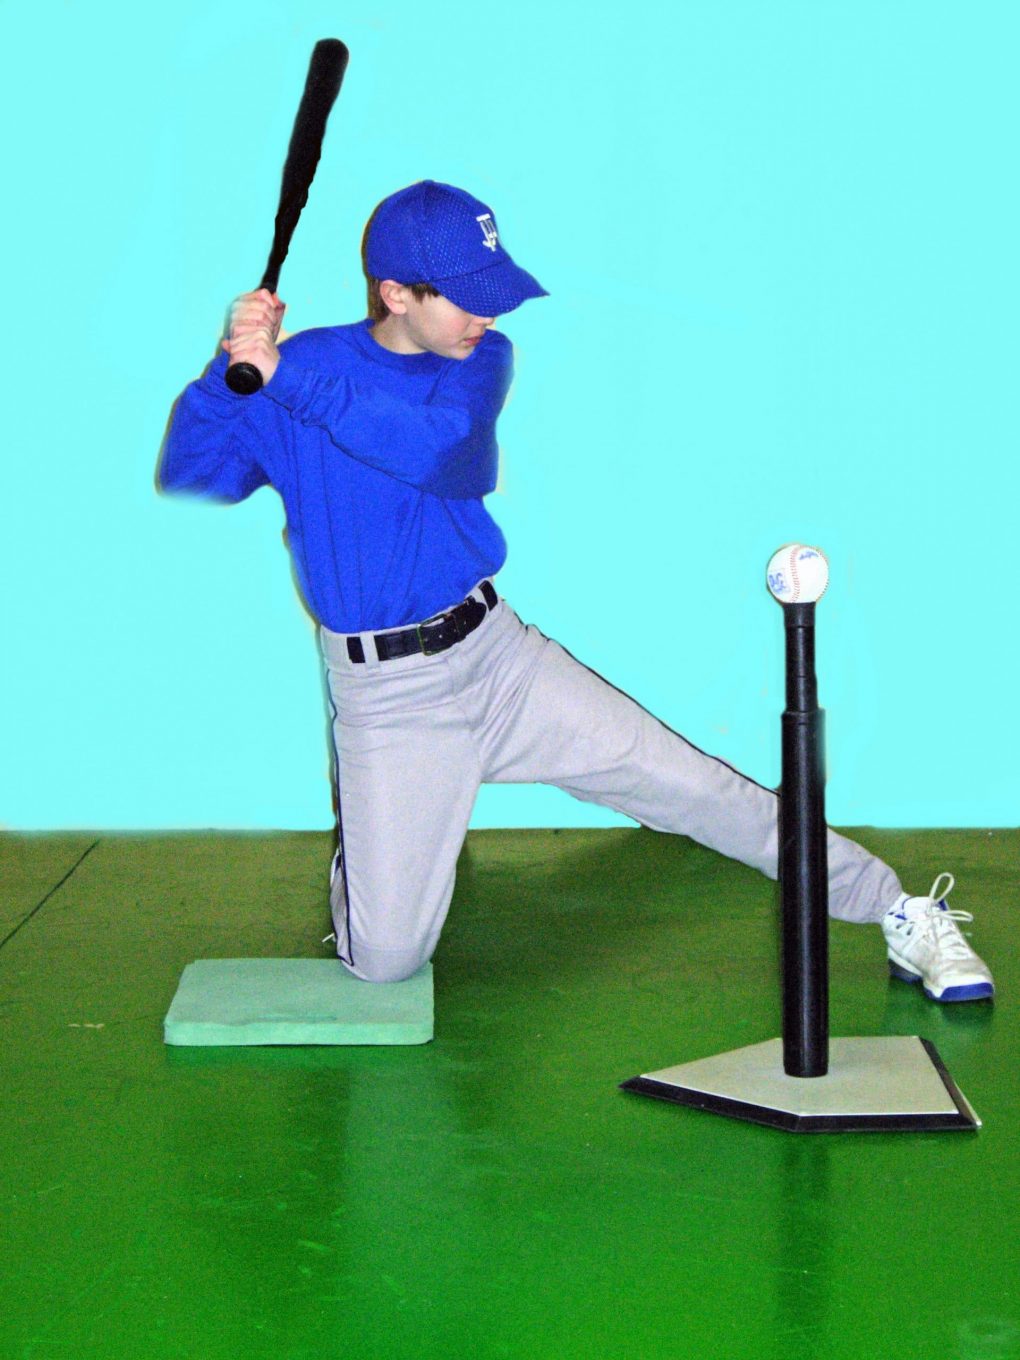 Baseball Hitting Drills that are Proven &amp; Perfect